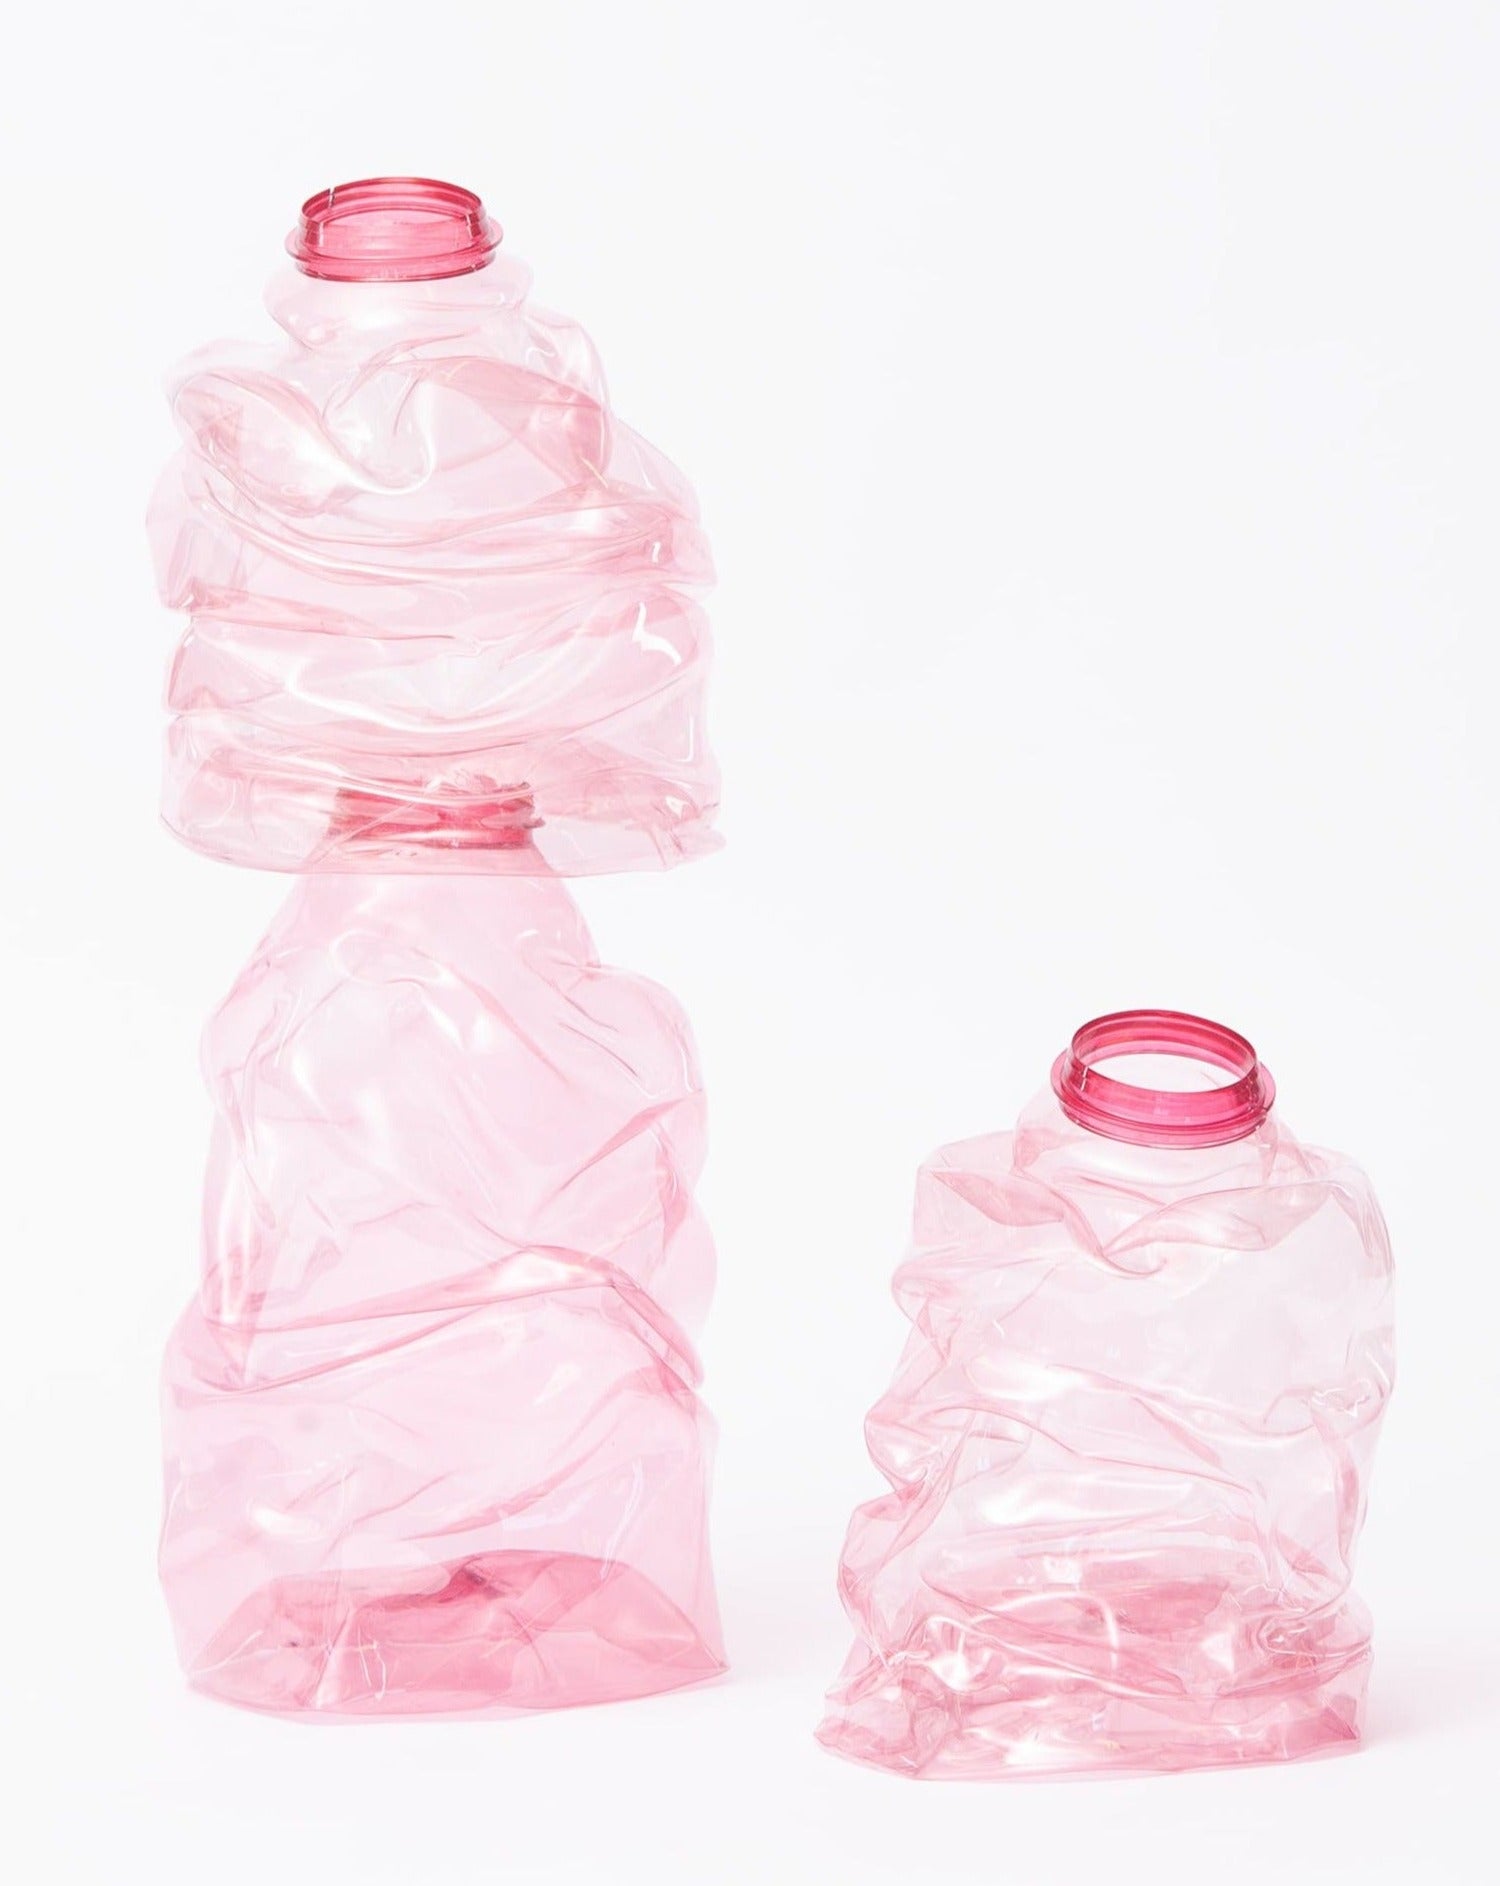 Pink handmade recycled plastic vases placed simultaneously on a white background